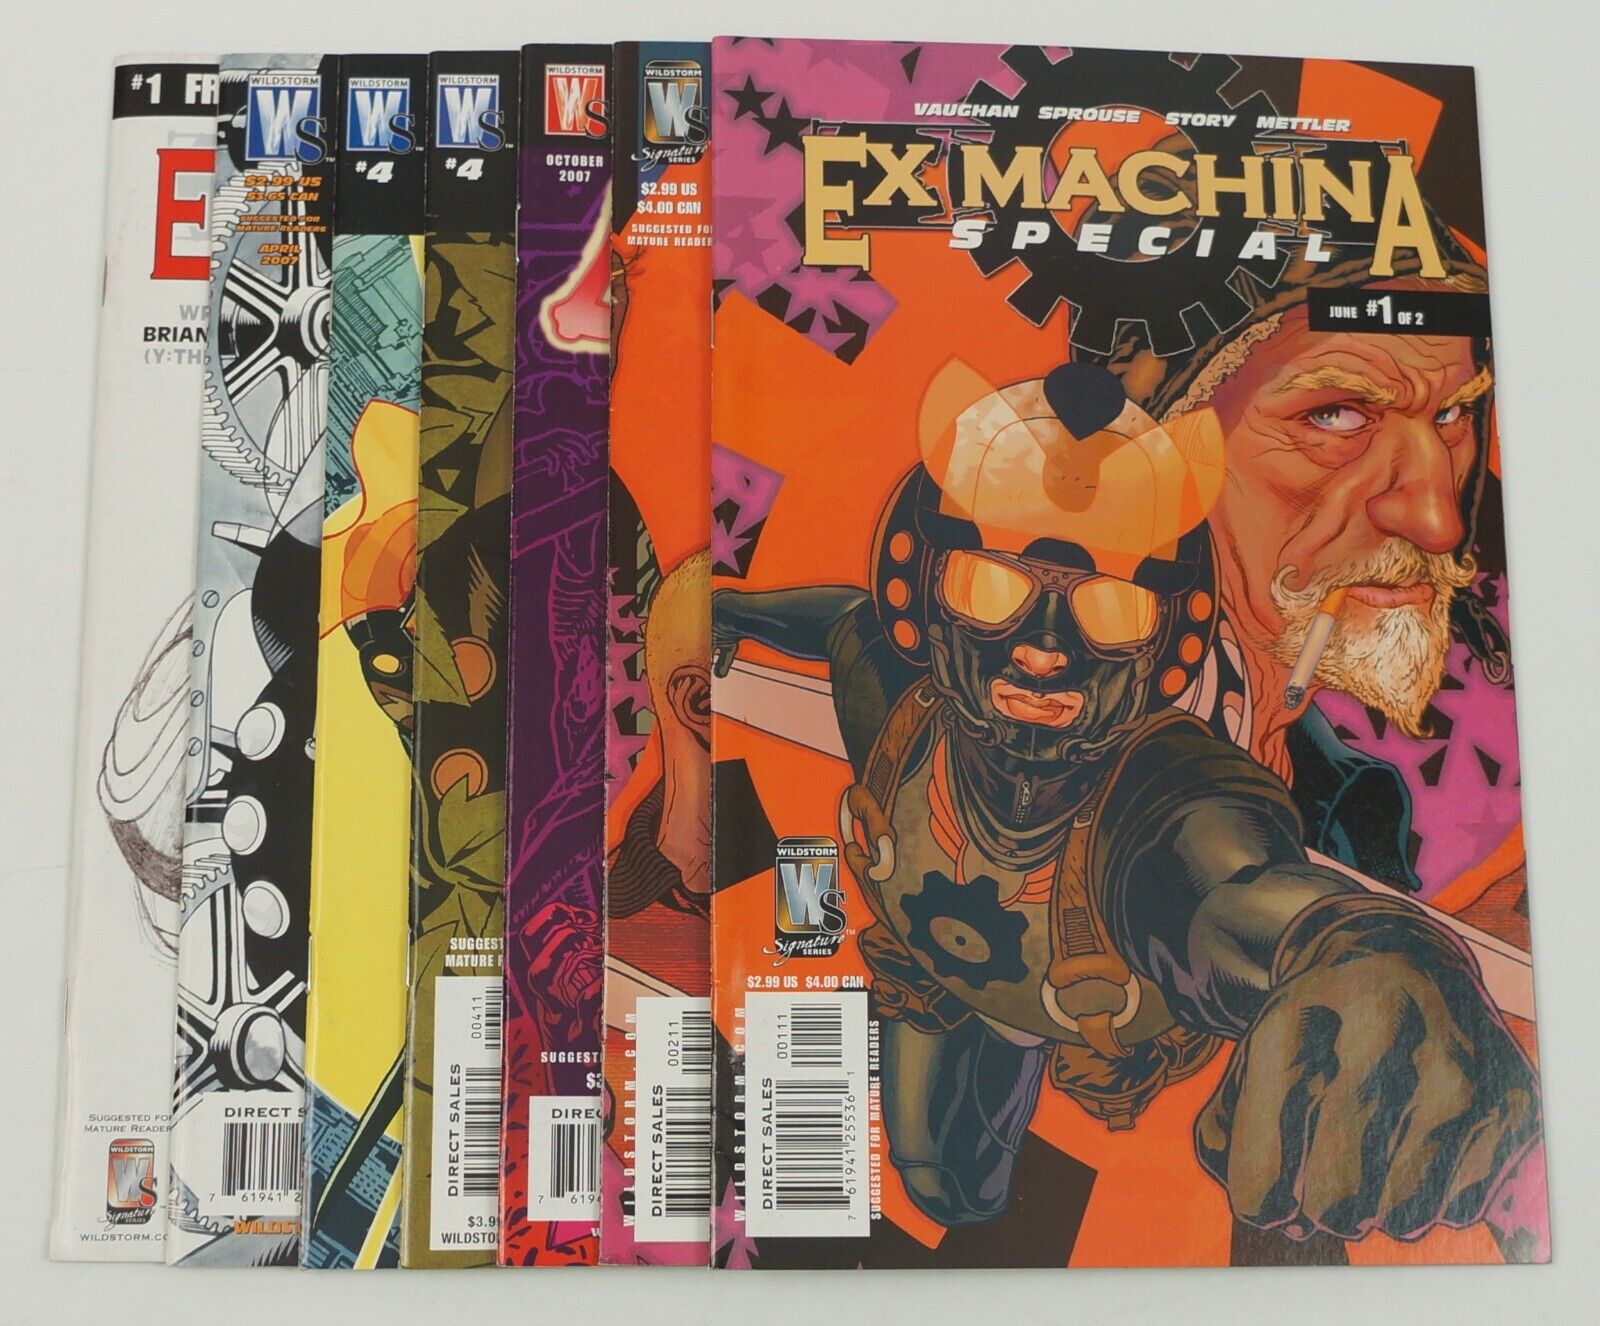 Ex Machina Special #1-4 VF/NM complete series + variant + Inside the Machine + 1